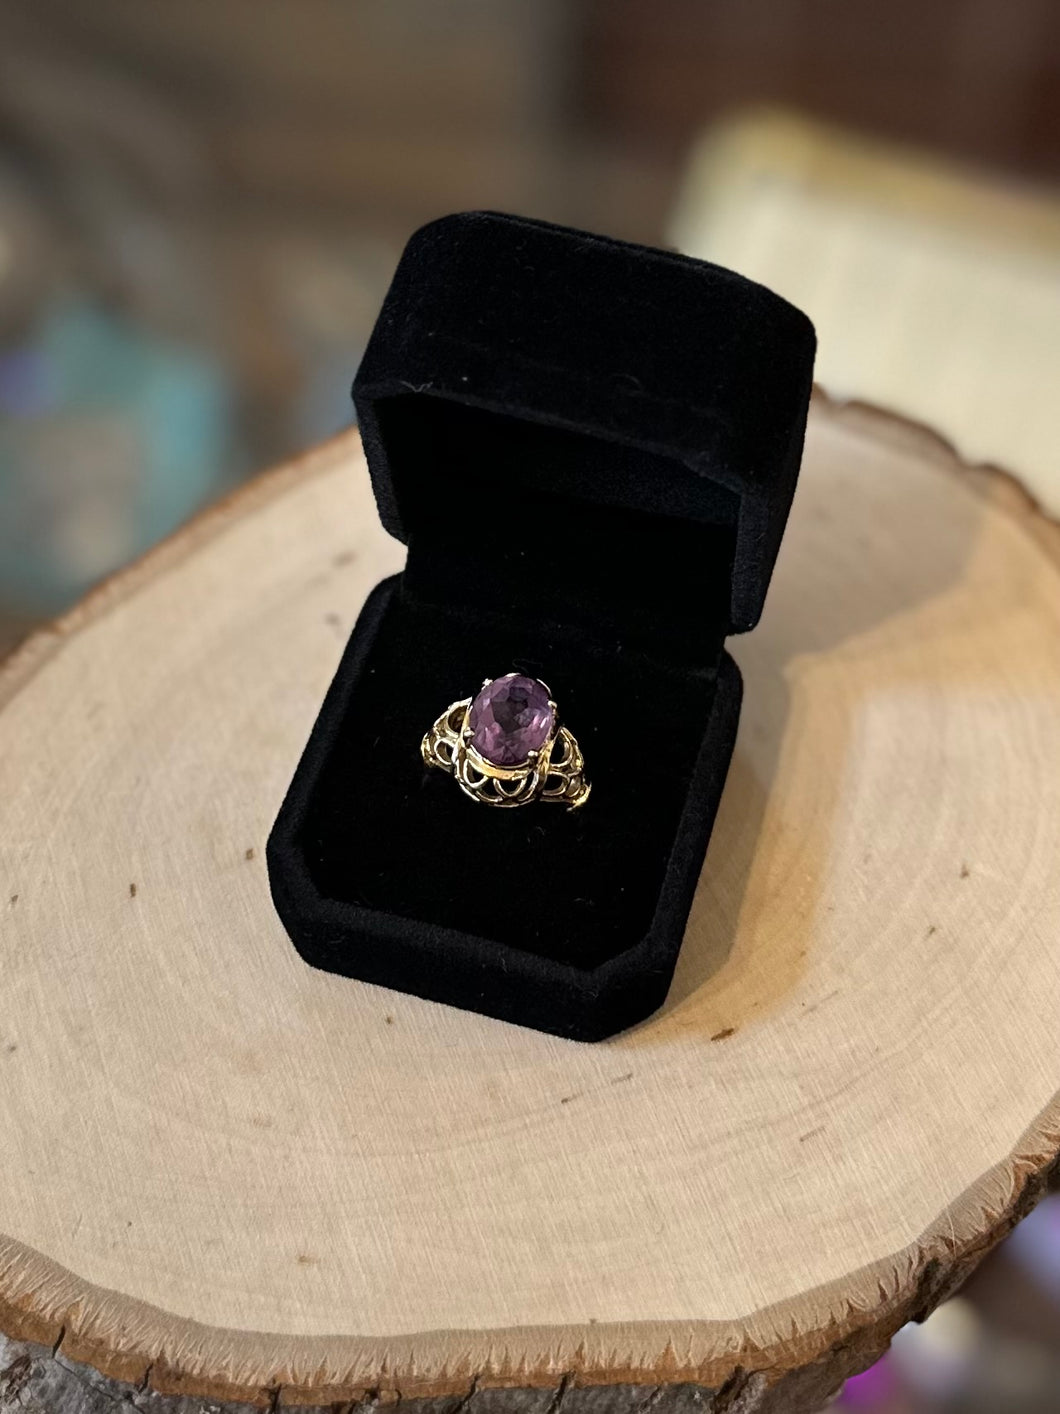 Vintage Hallmarked Fessenden & Co. Ornate Gold Plated Faceted Faux Amethyst Cocktail Ring US Size 7 1/4